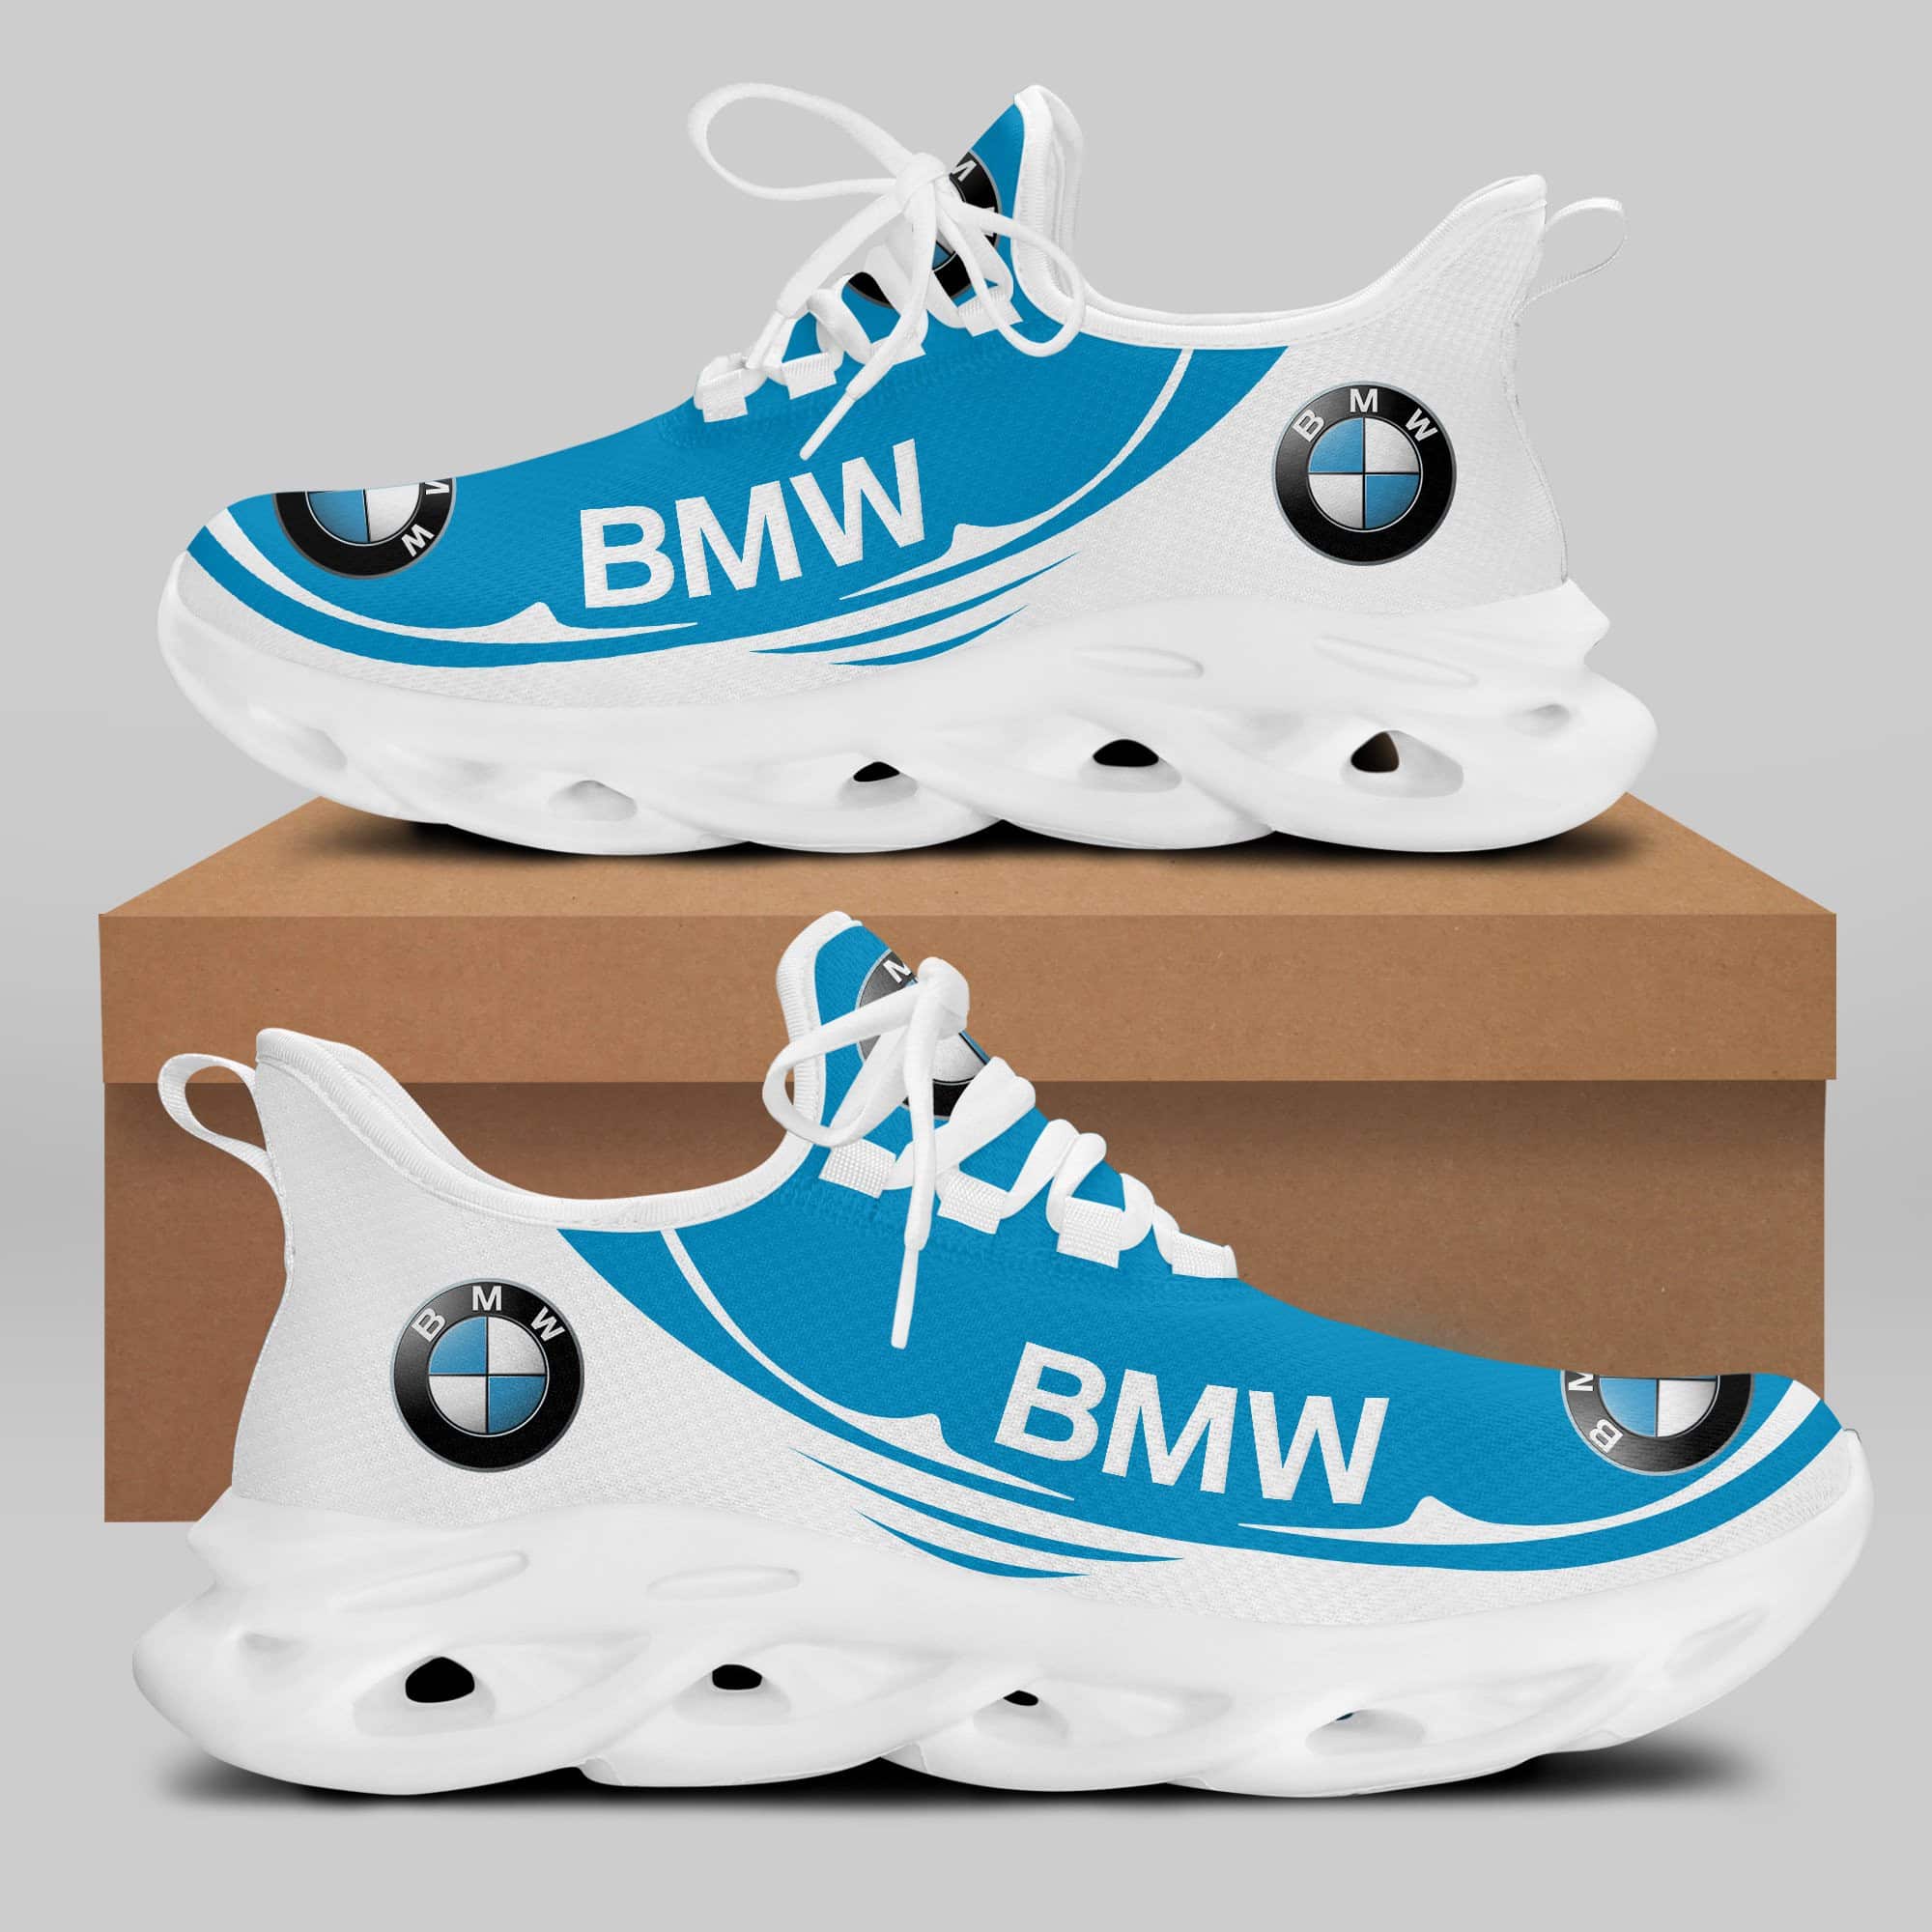 Bmw Running Shoes Max Soul Shoes Sneakers Ver 30 1